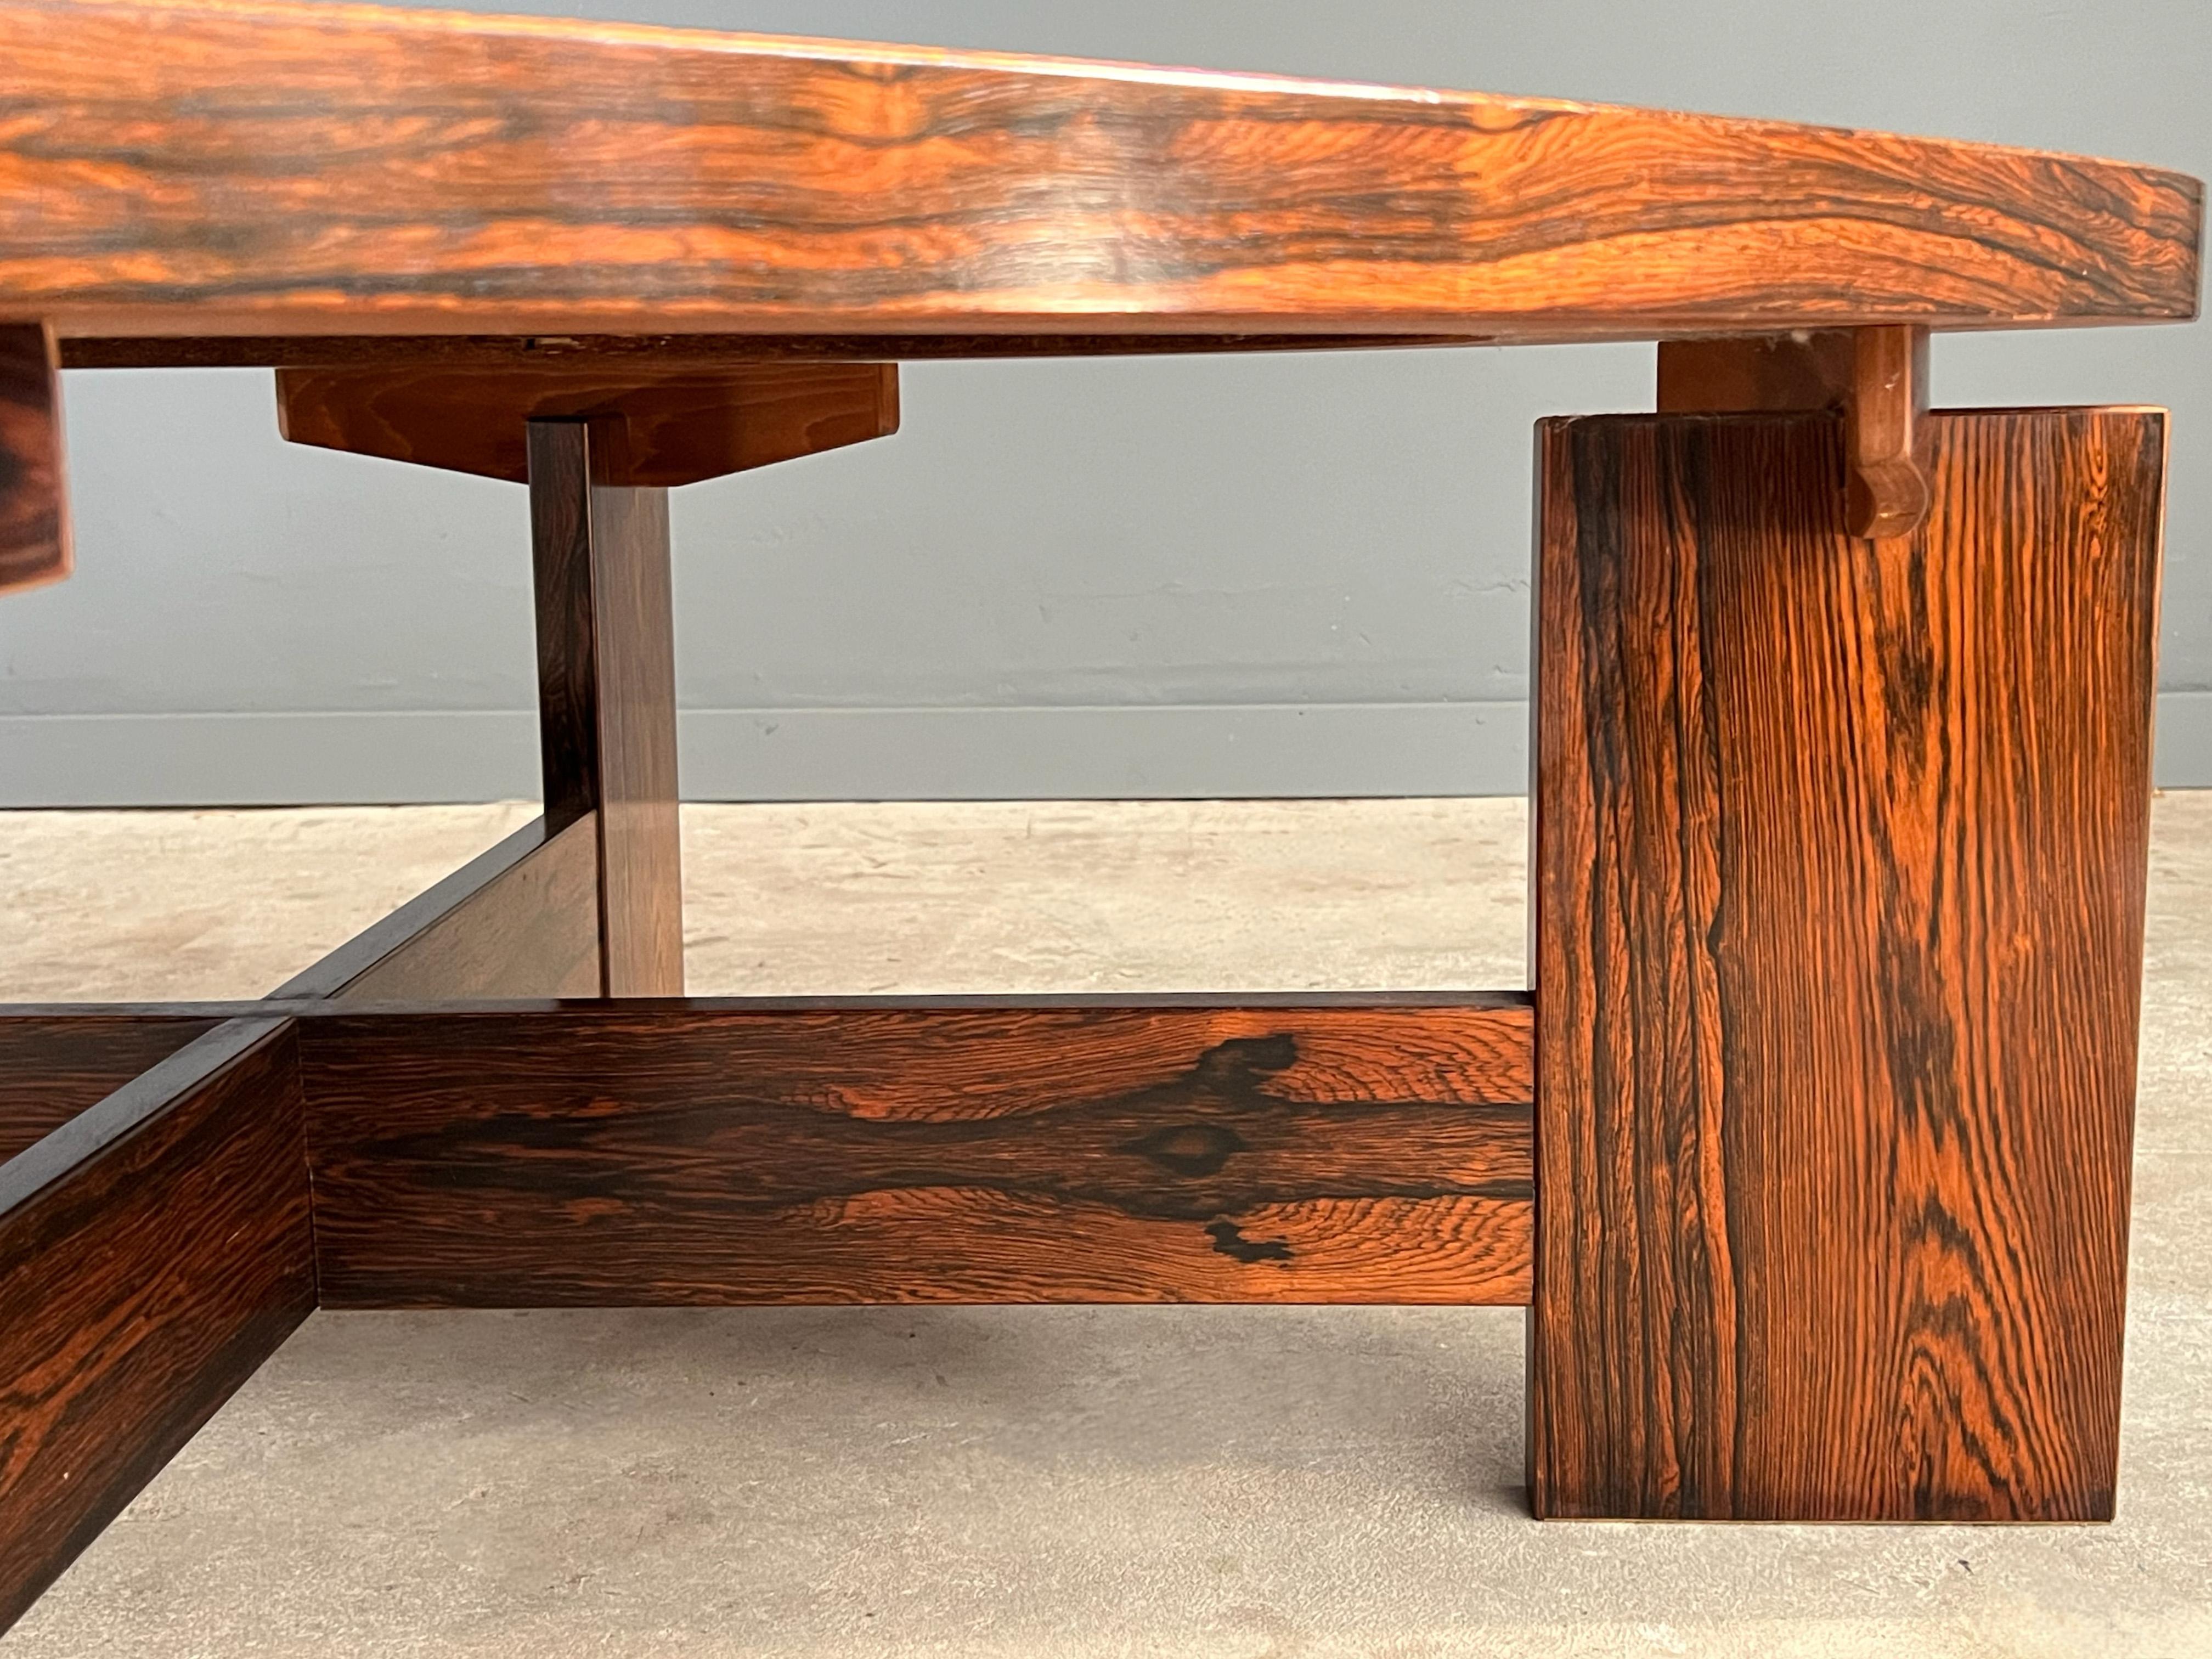 Danish Brazilian Rosewood and Tile Coffee Table Attributed to Tue Poulsen